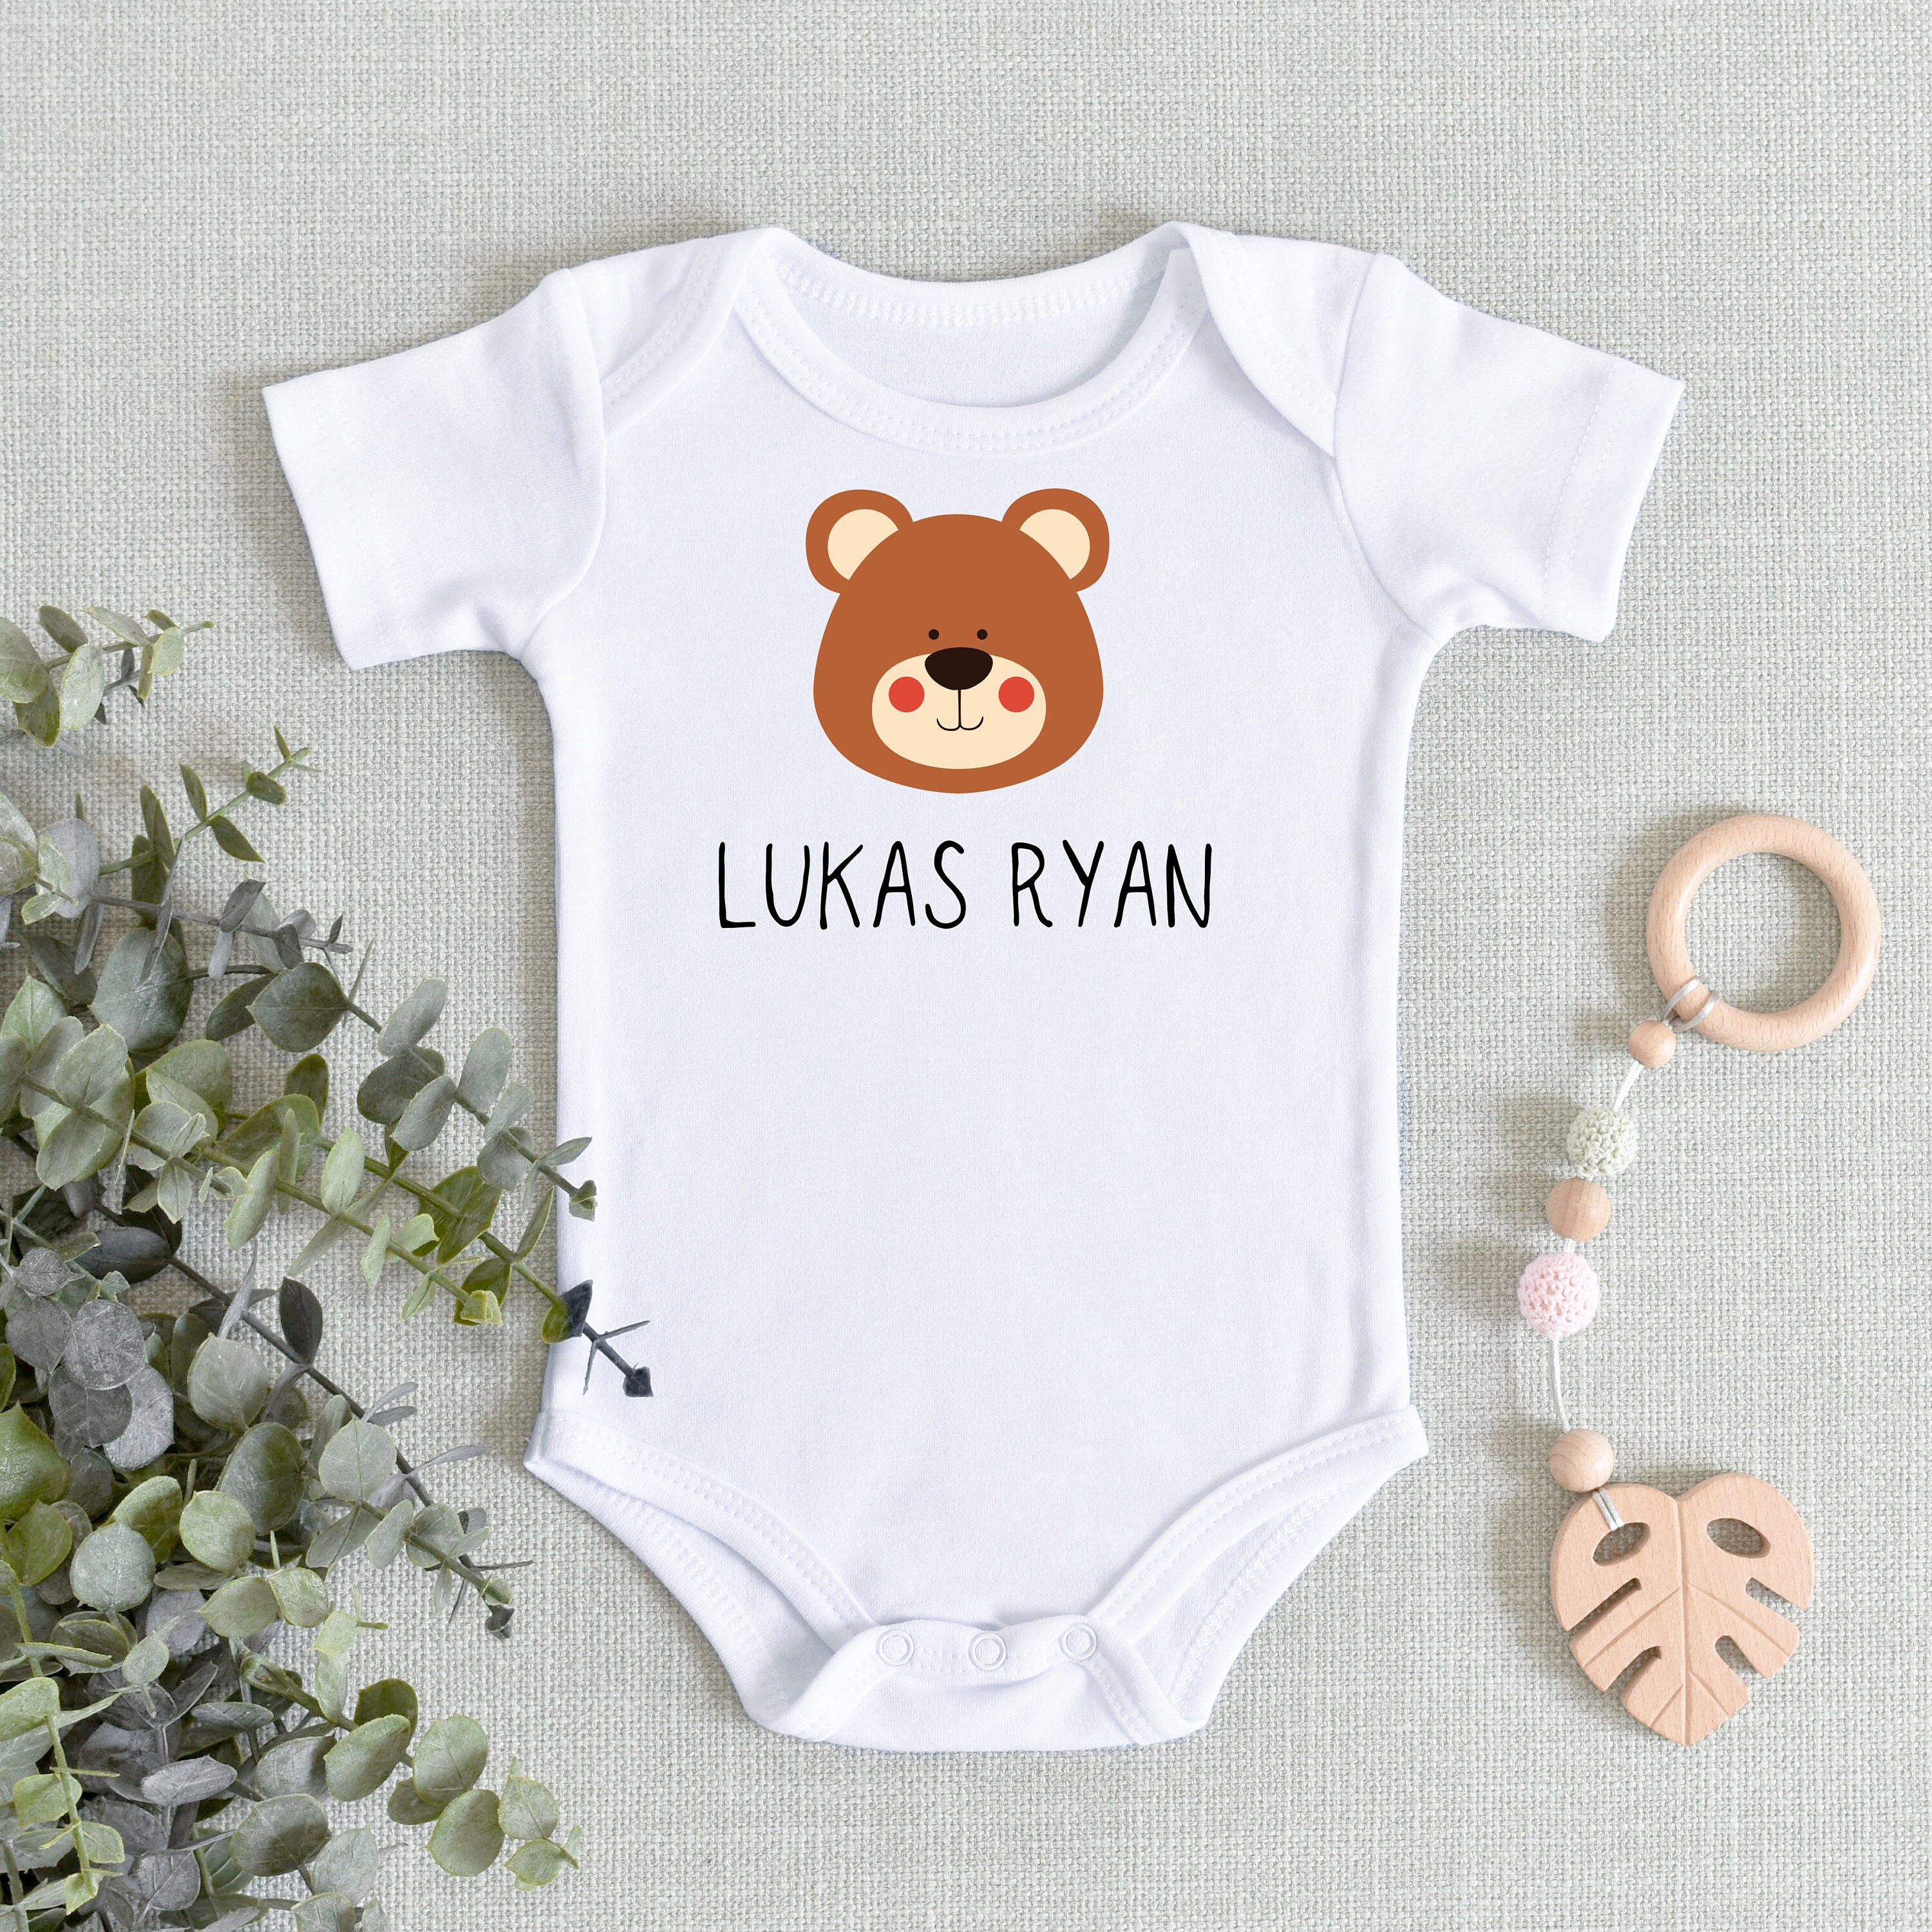 Personalized Baby Outfit Name Baby Gift Animal Baby Clothes | Etsy